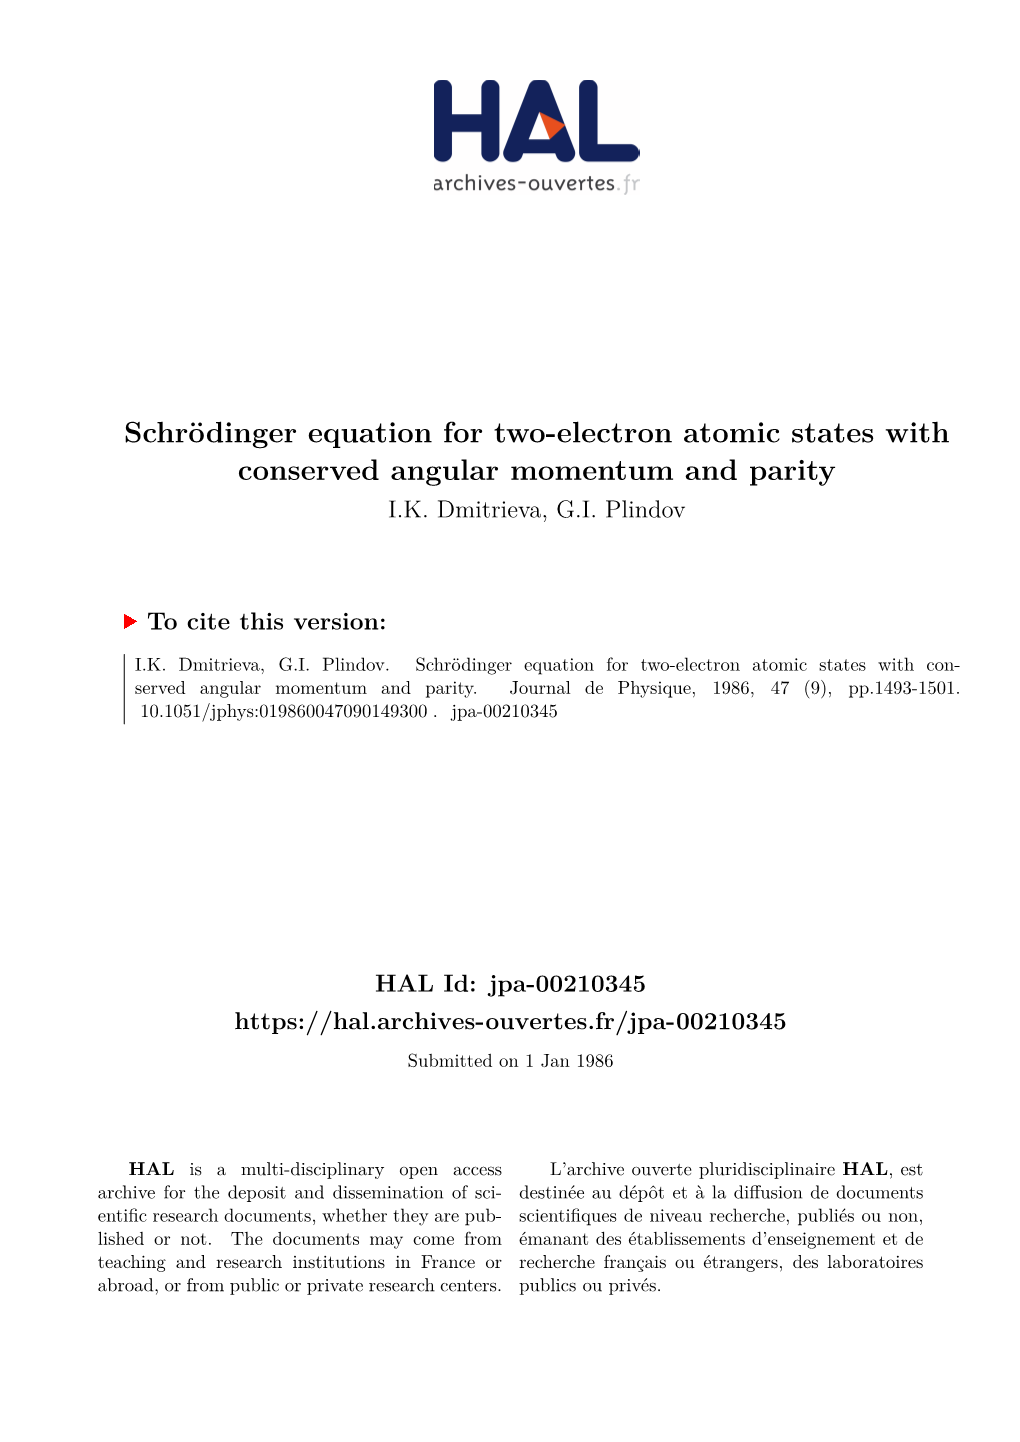 Schrödinger Equation for Two-Electron Atomic States with Conserved Angular Momentum and Parity I.K